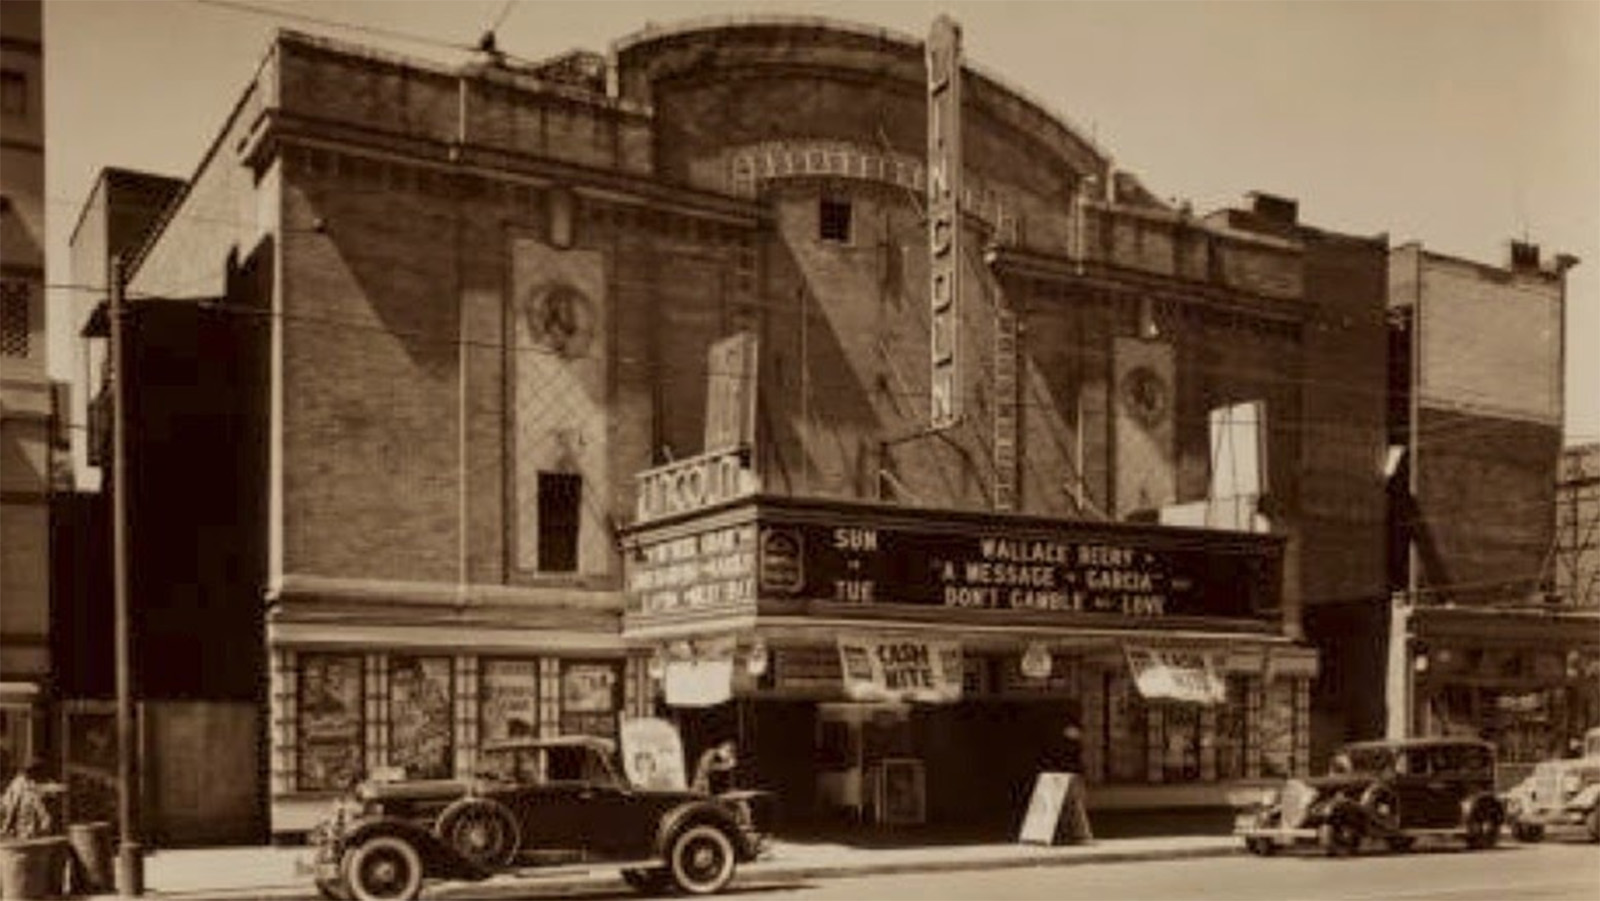 A sepia-toned daytime photo of the front of the Lincoln Theatre in New York. Old-fashioned vehicles are parked on the street in front of the building.